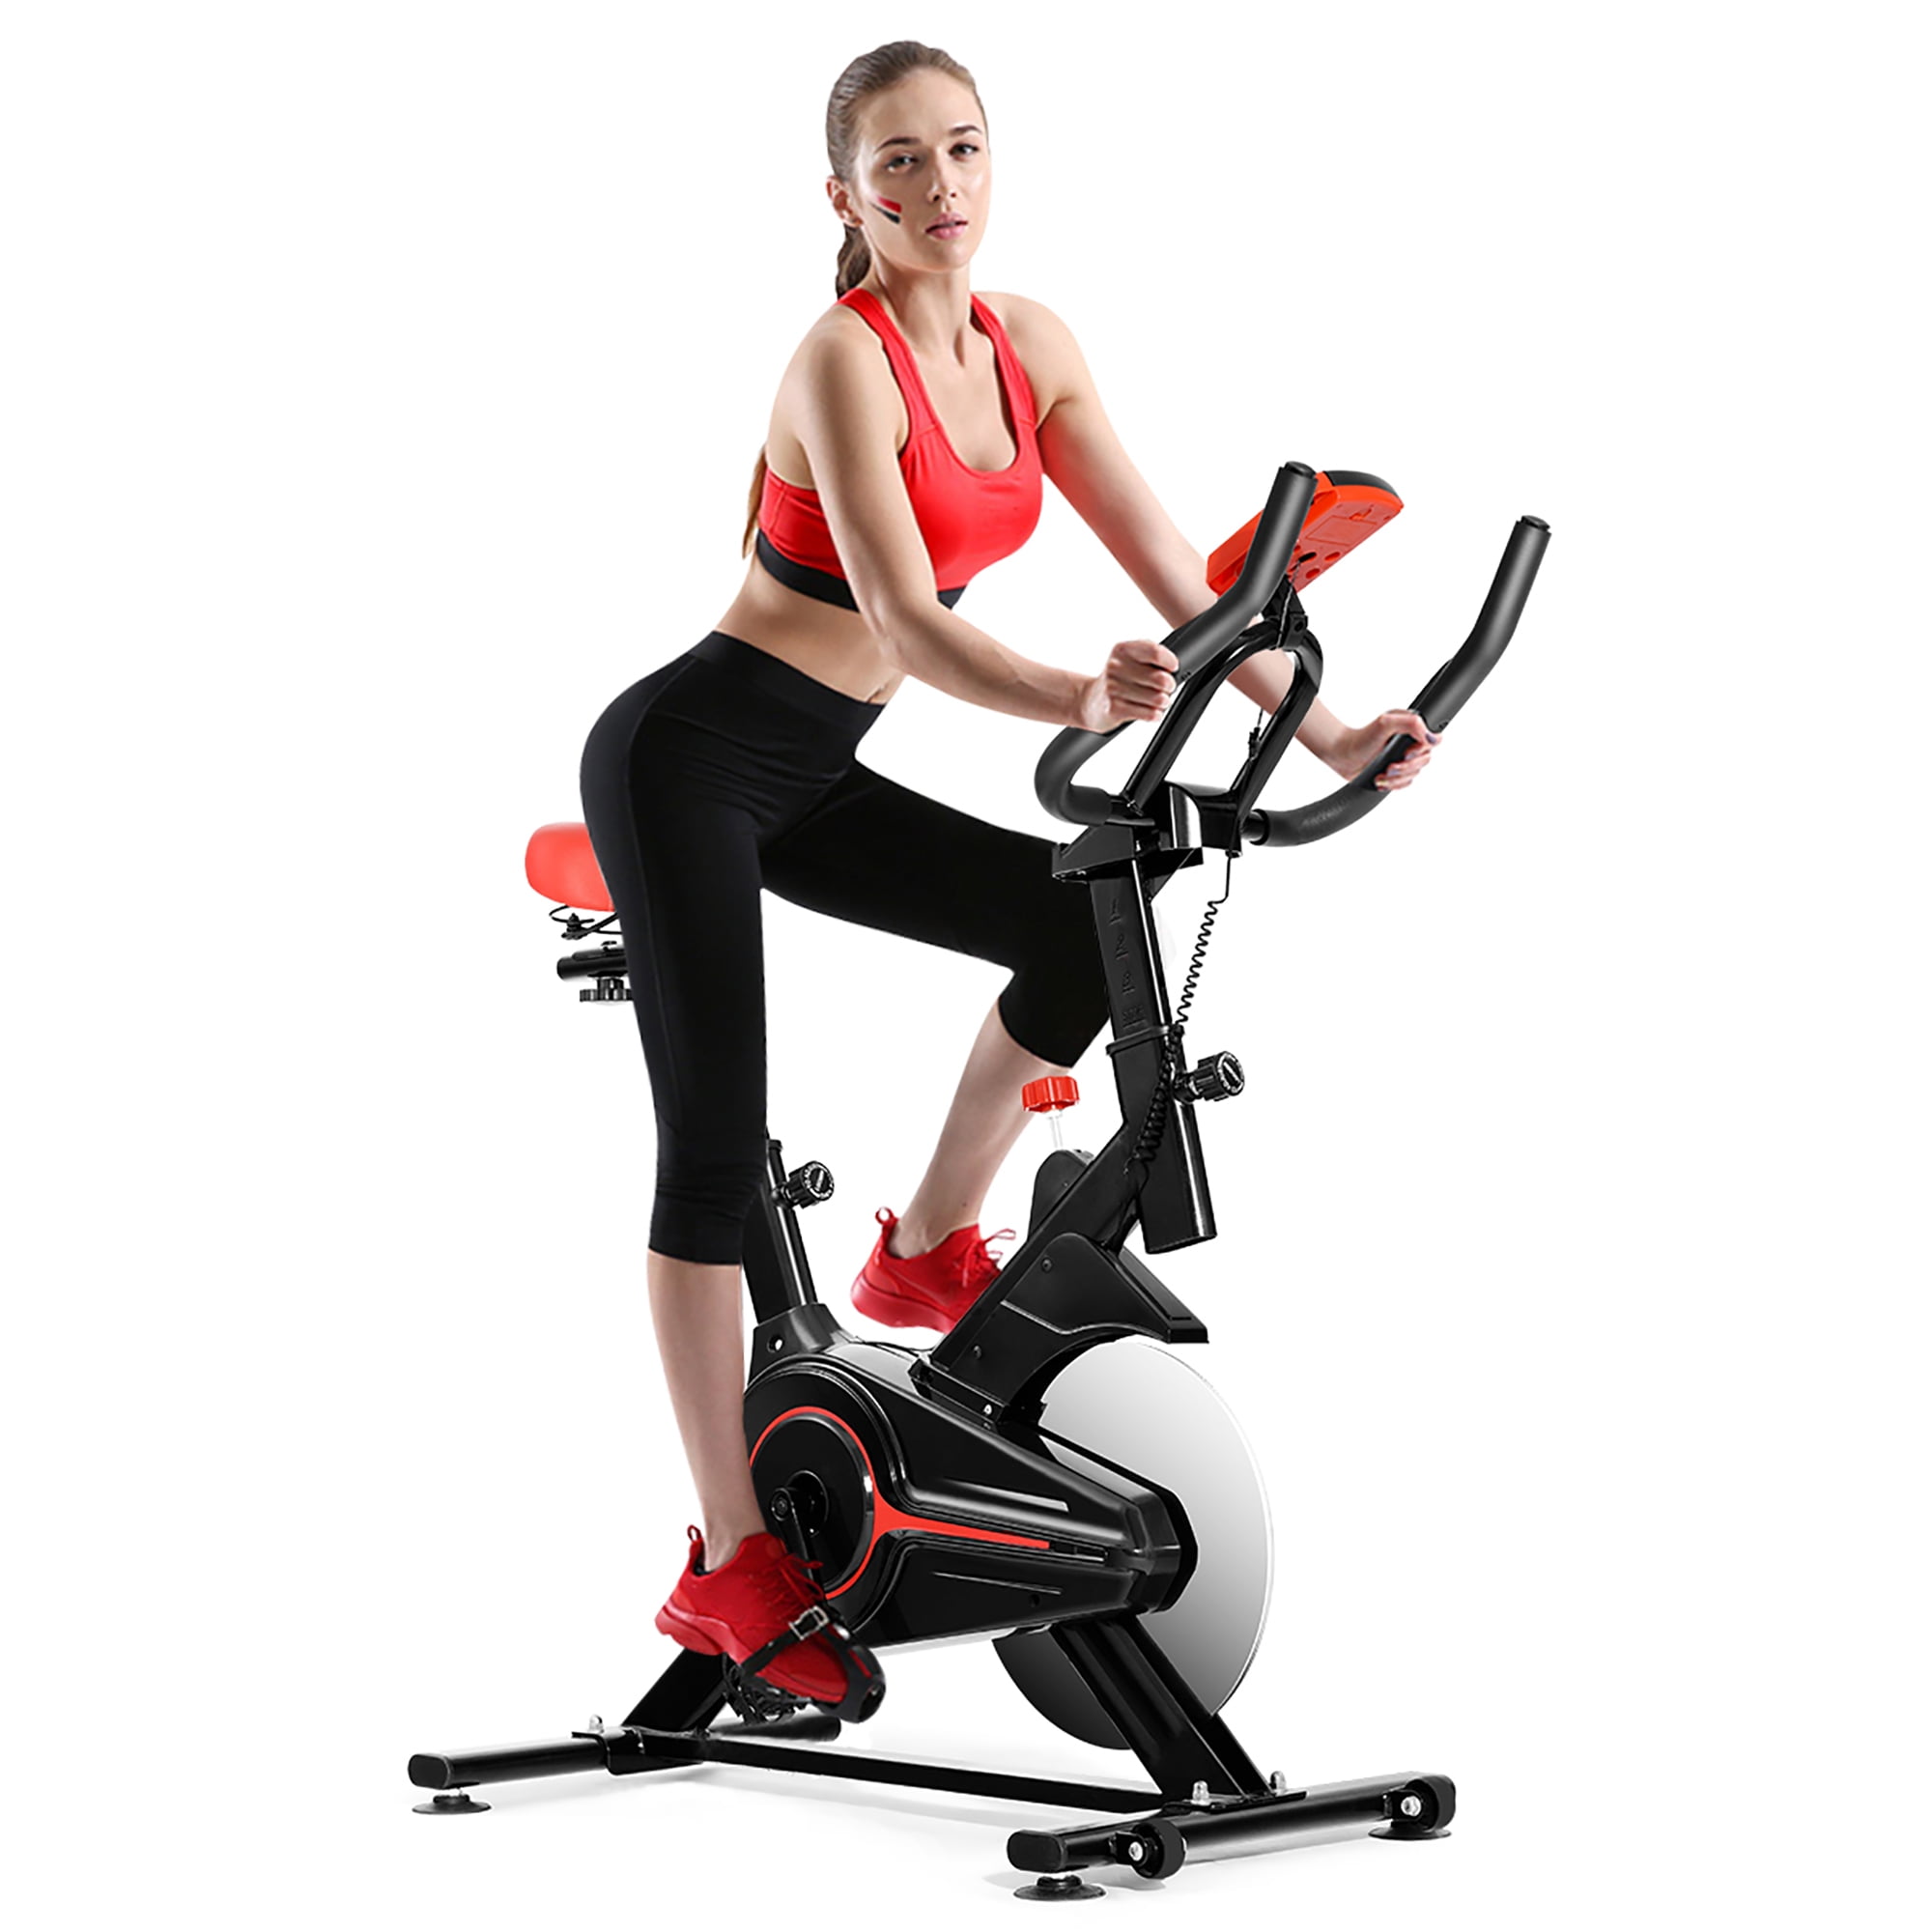 Details about   Stationary Exercise Bike Indoor Cycling Bicycle Cardio Fitness Gym Workout 40lb 